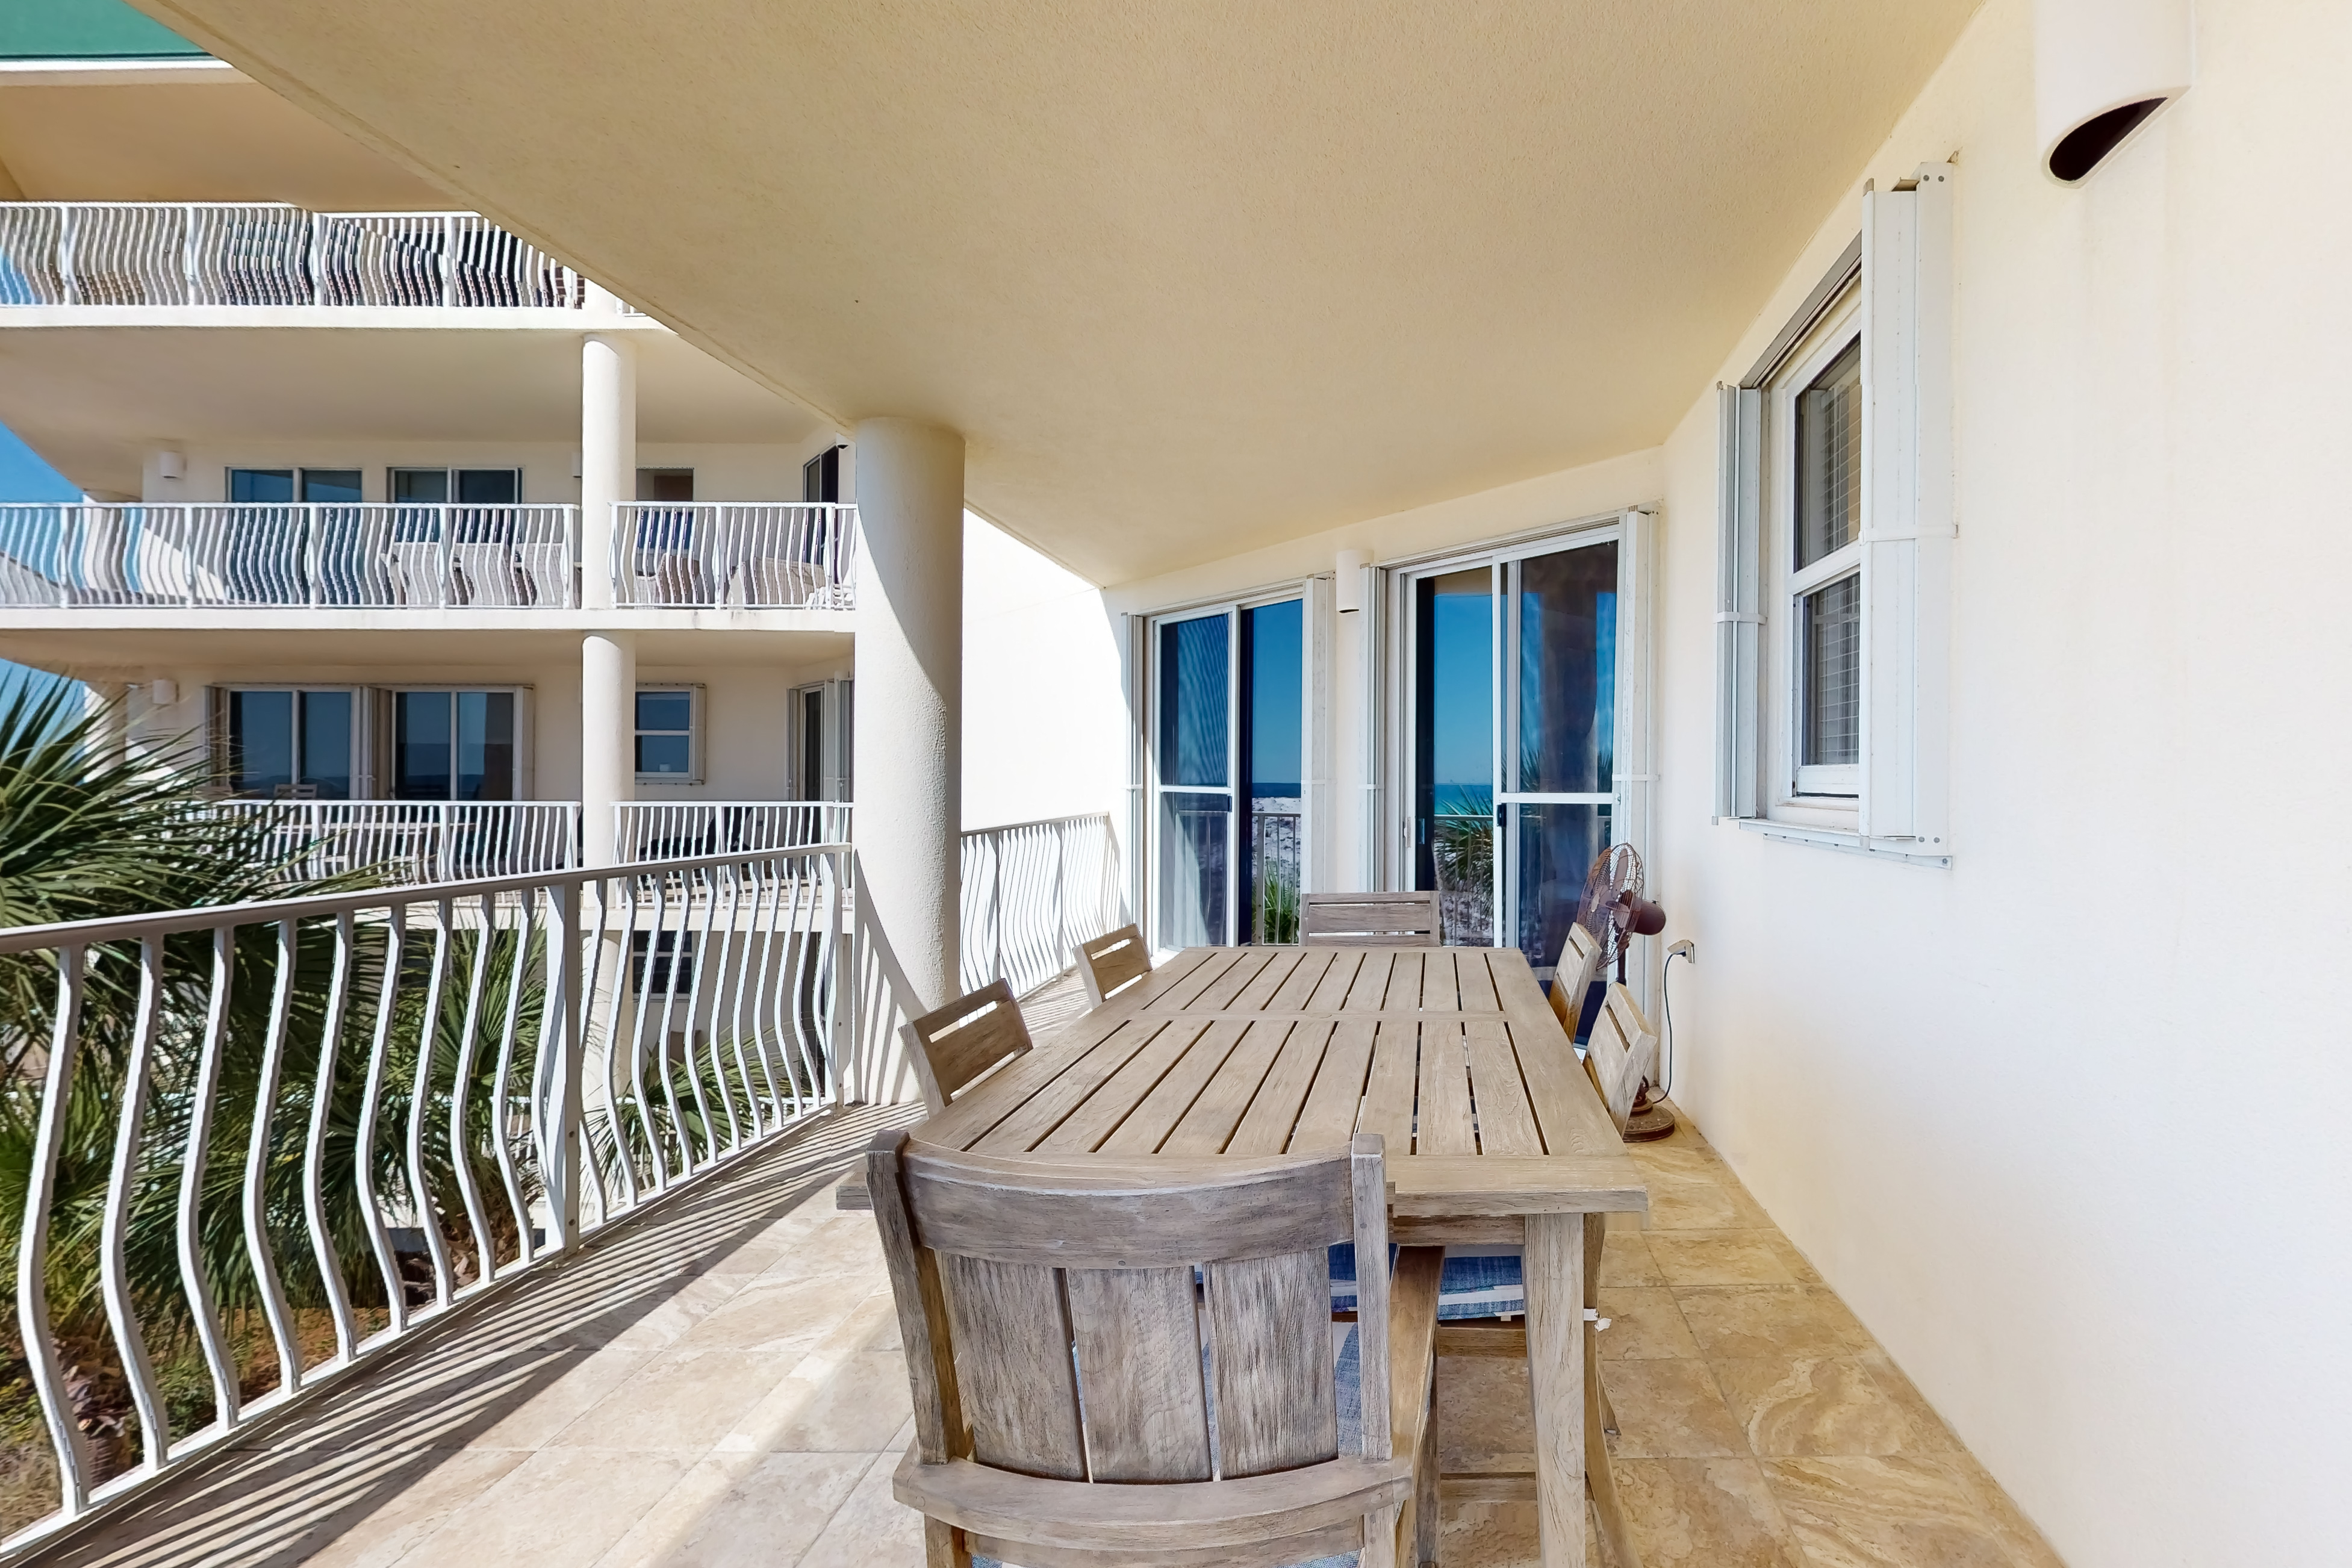 Dunes of Seagrove A209 Condo rental in Dunes of Seagrove in Highway 30-A Florida - #31